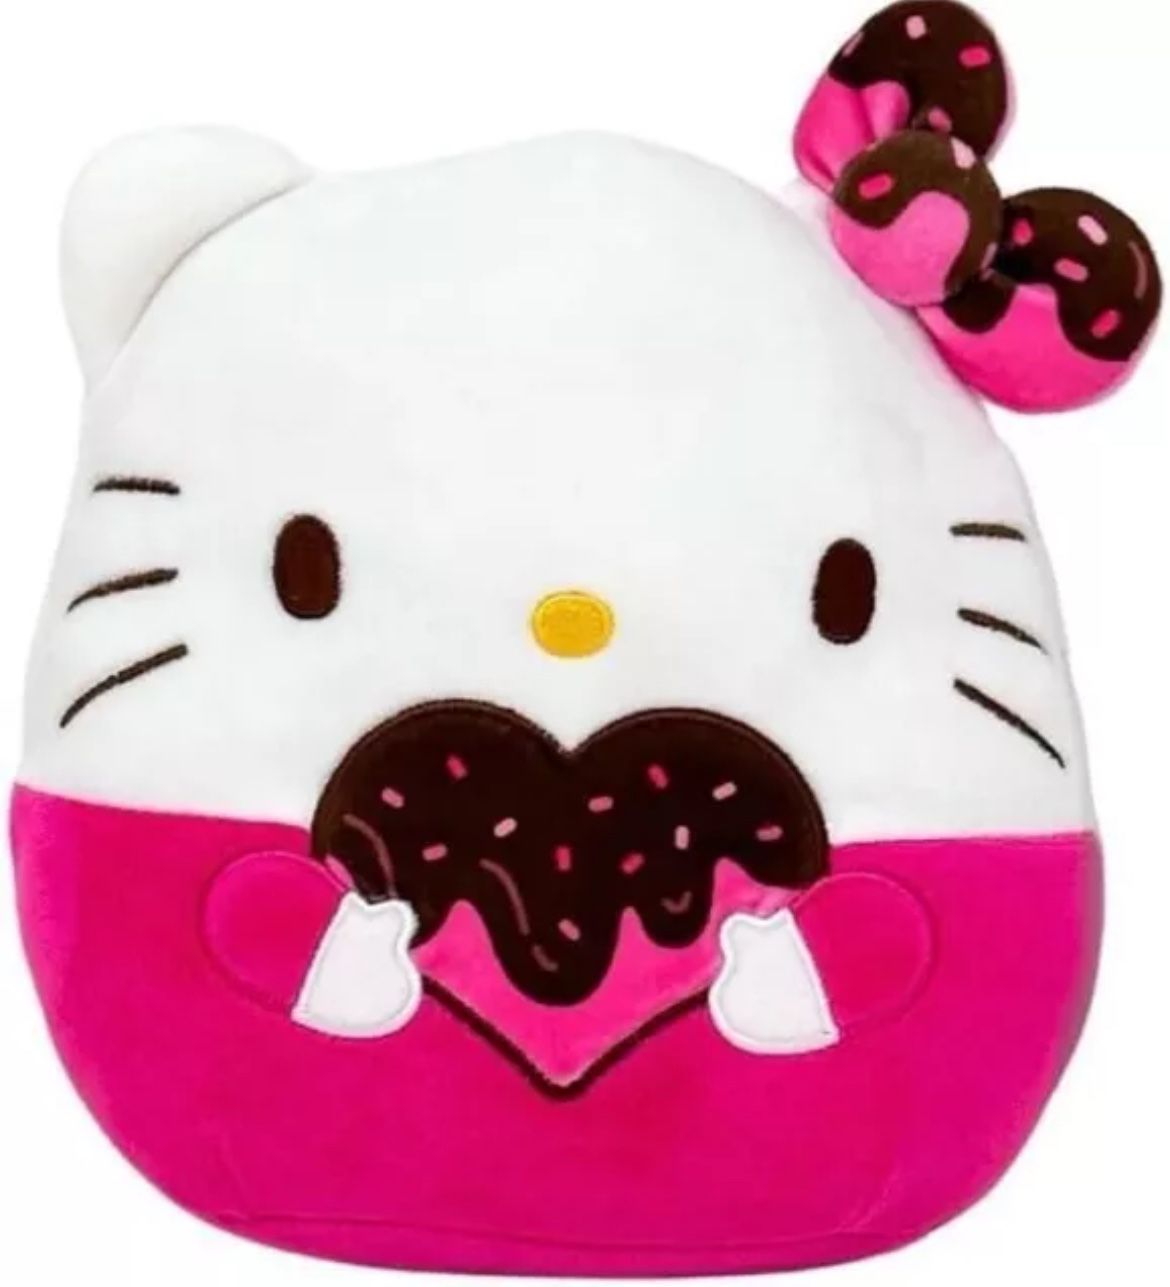 Hugging Pillow Toy Cute Stuffed Soft Plushie Decor for Kids - Hello Kitty 9''